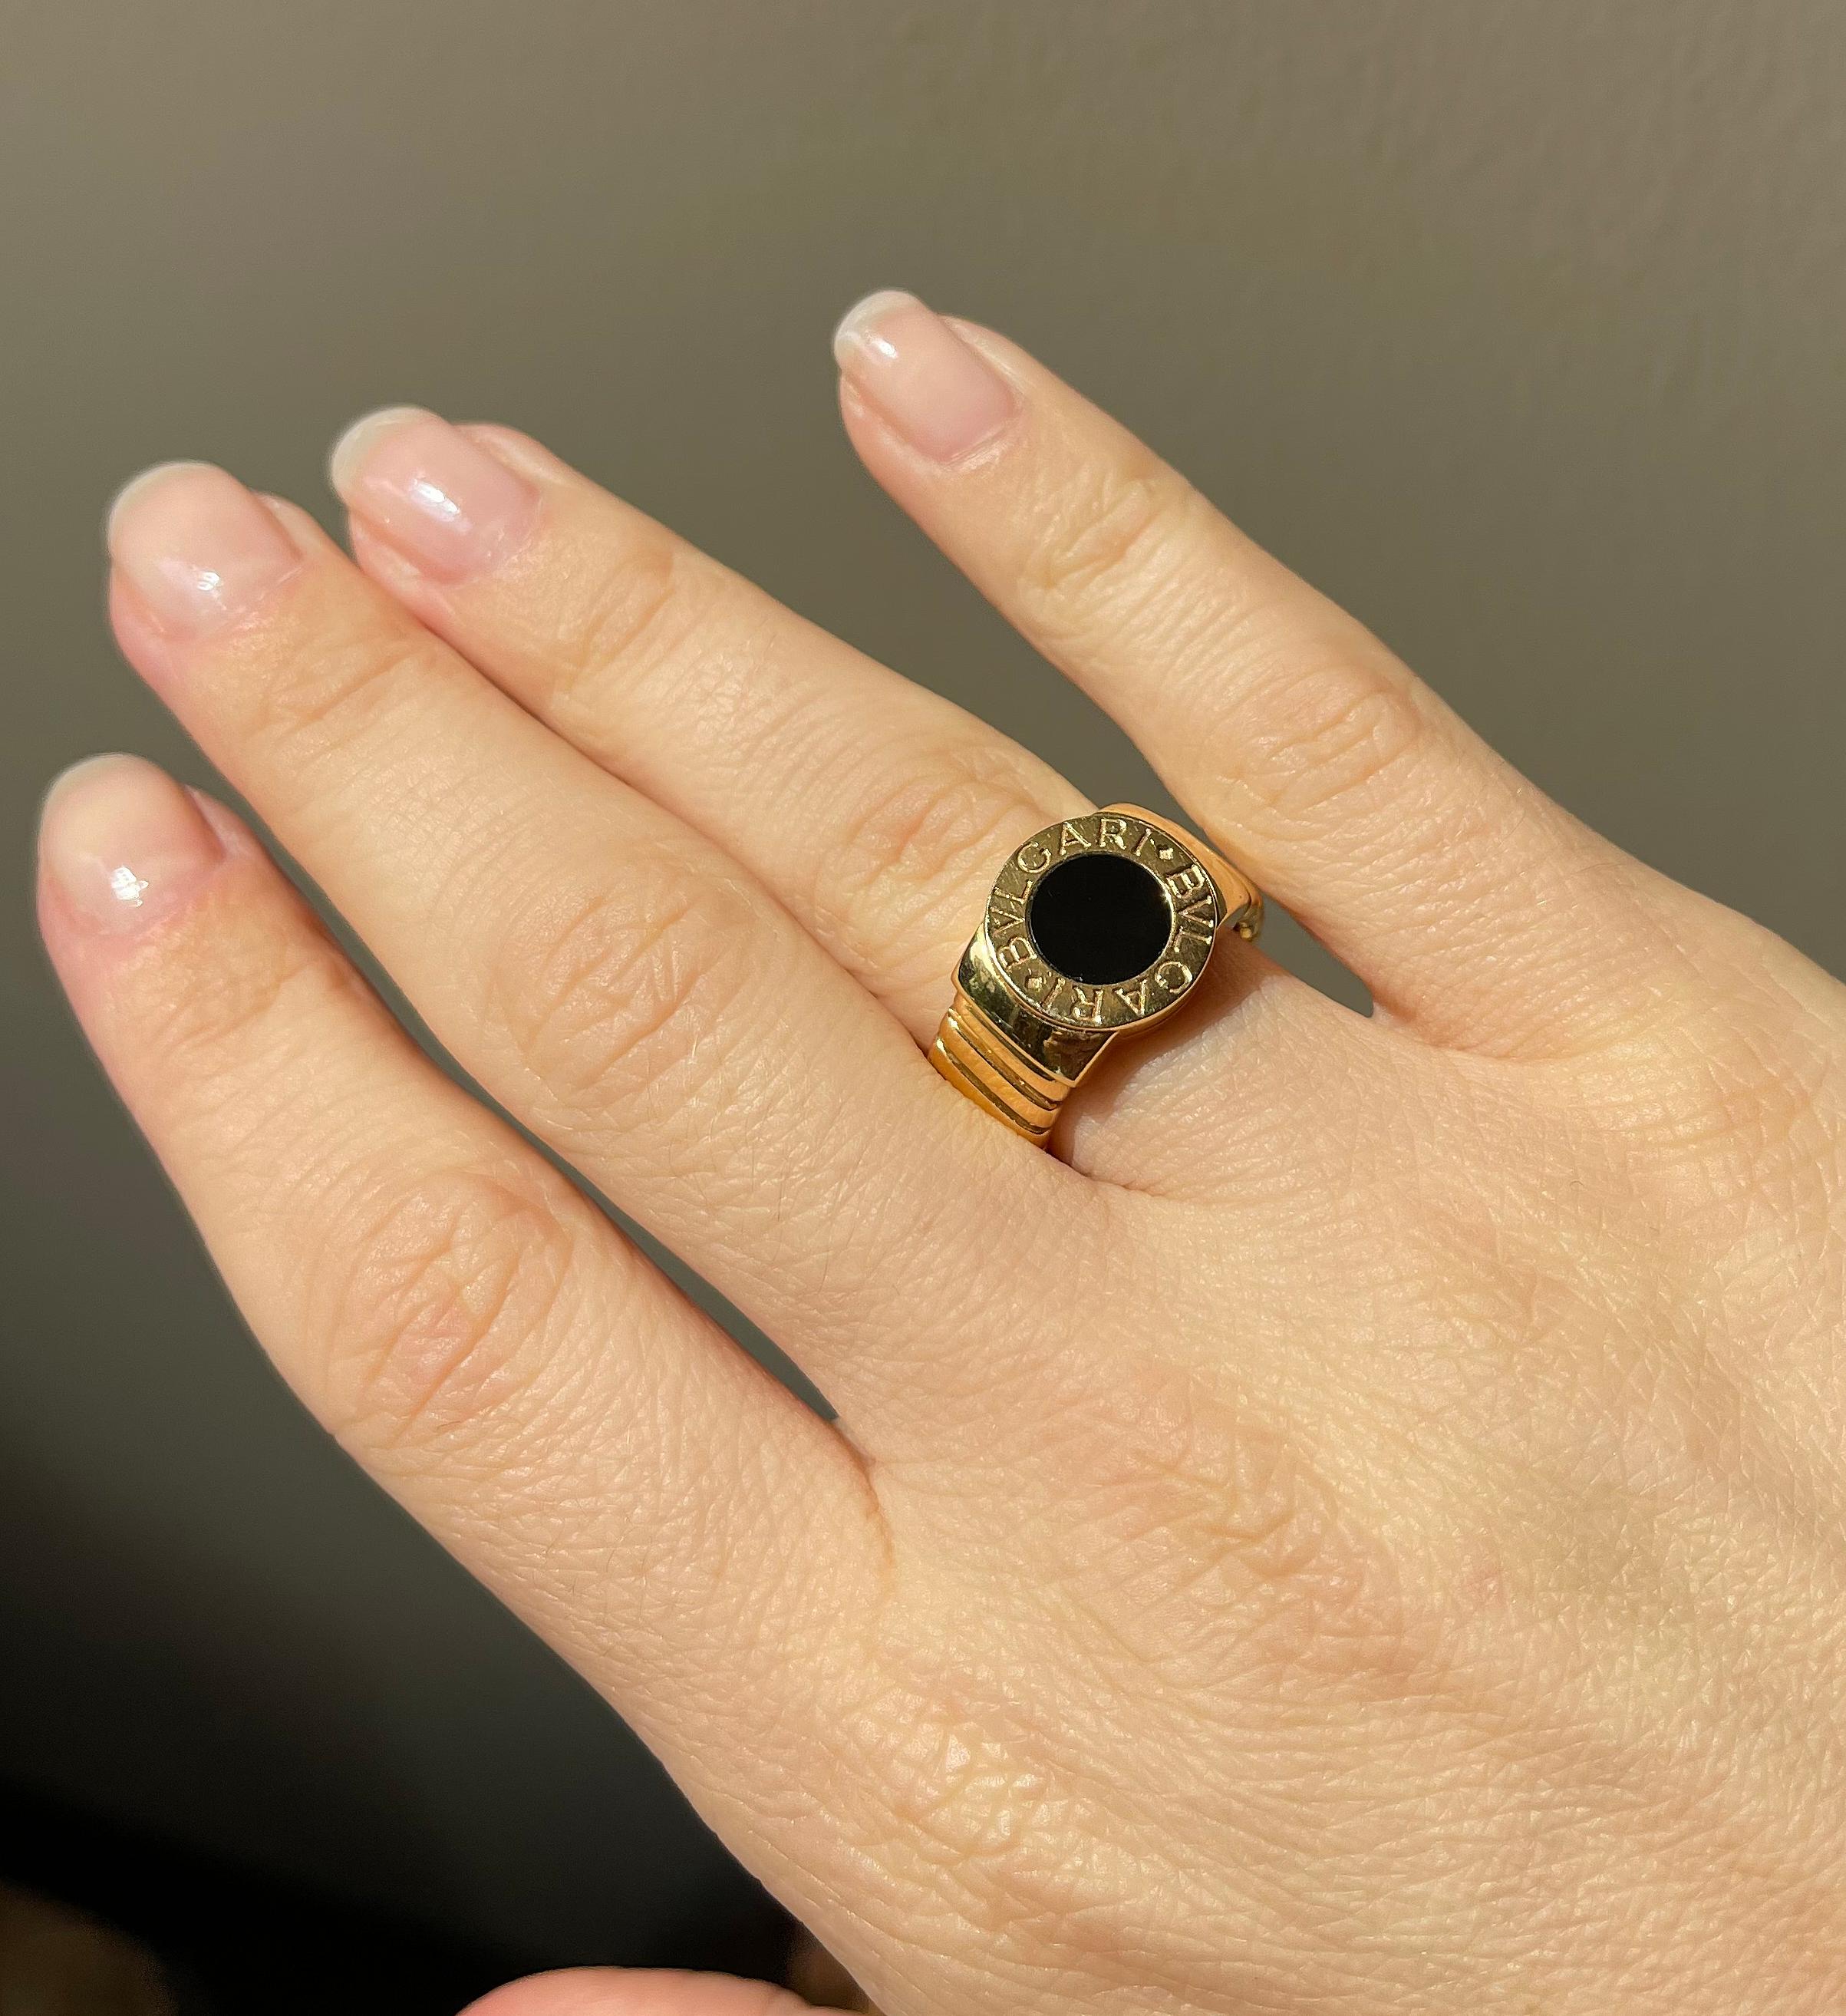 Classic 18k gold Tubogas ring by Bvlgari, with onyx top. The ring has open back design, slightly flexible in size. Ring top is 0.5